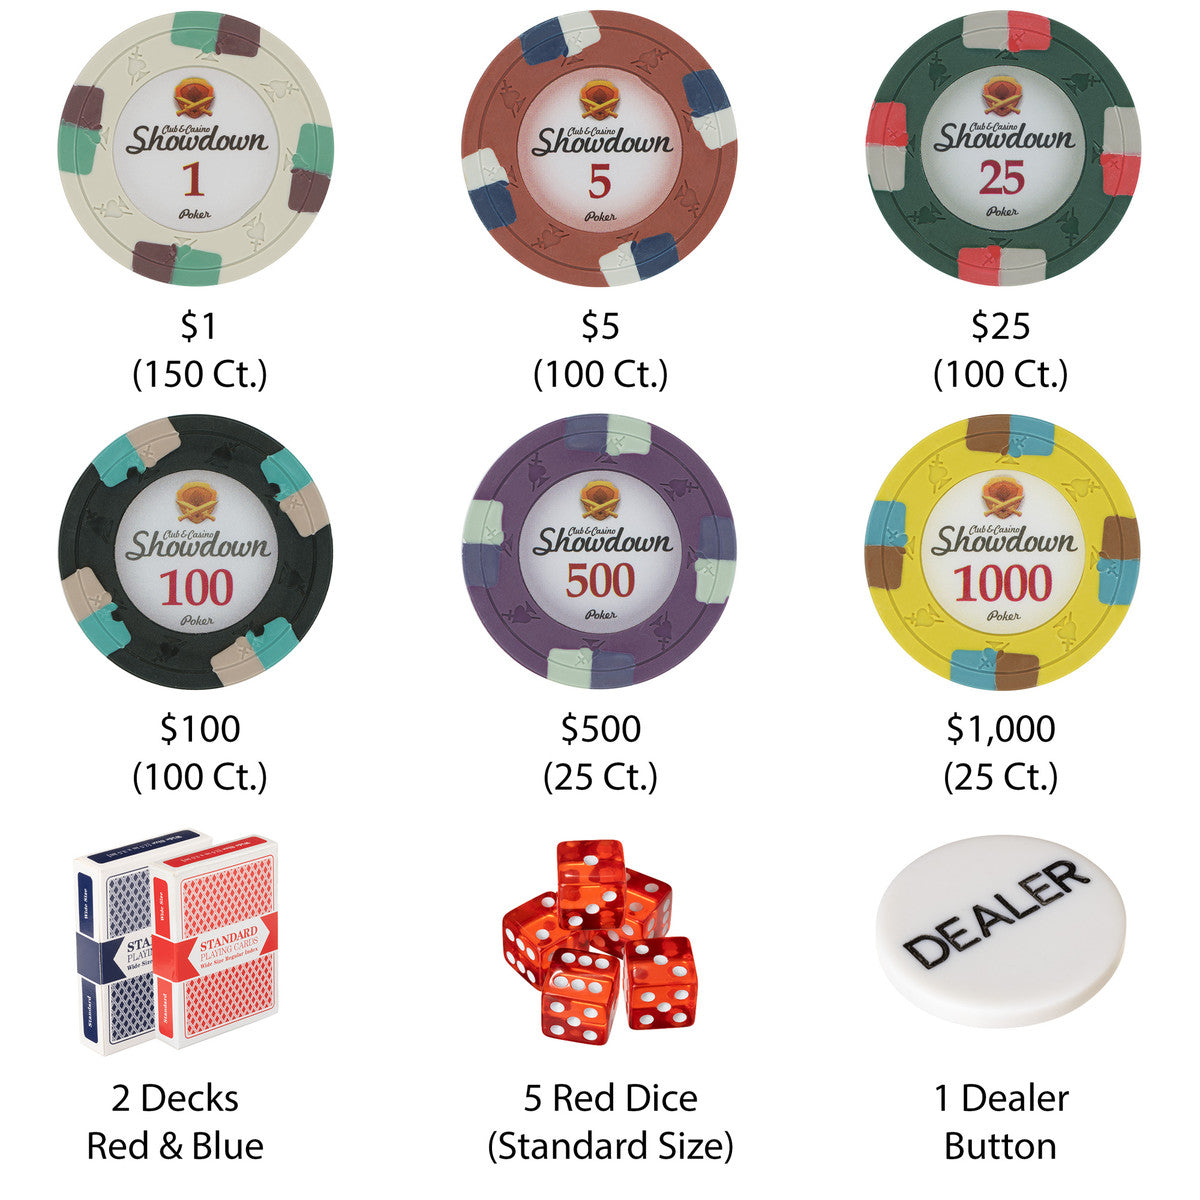 500 Showdown Poker Chips with Aluminum Case